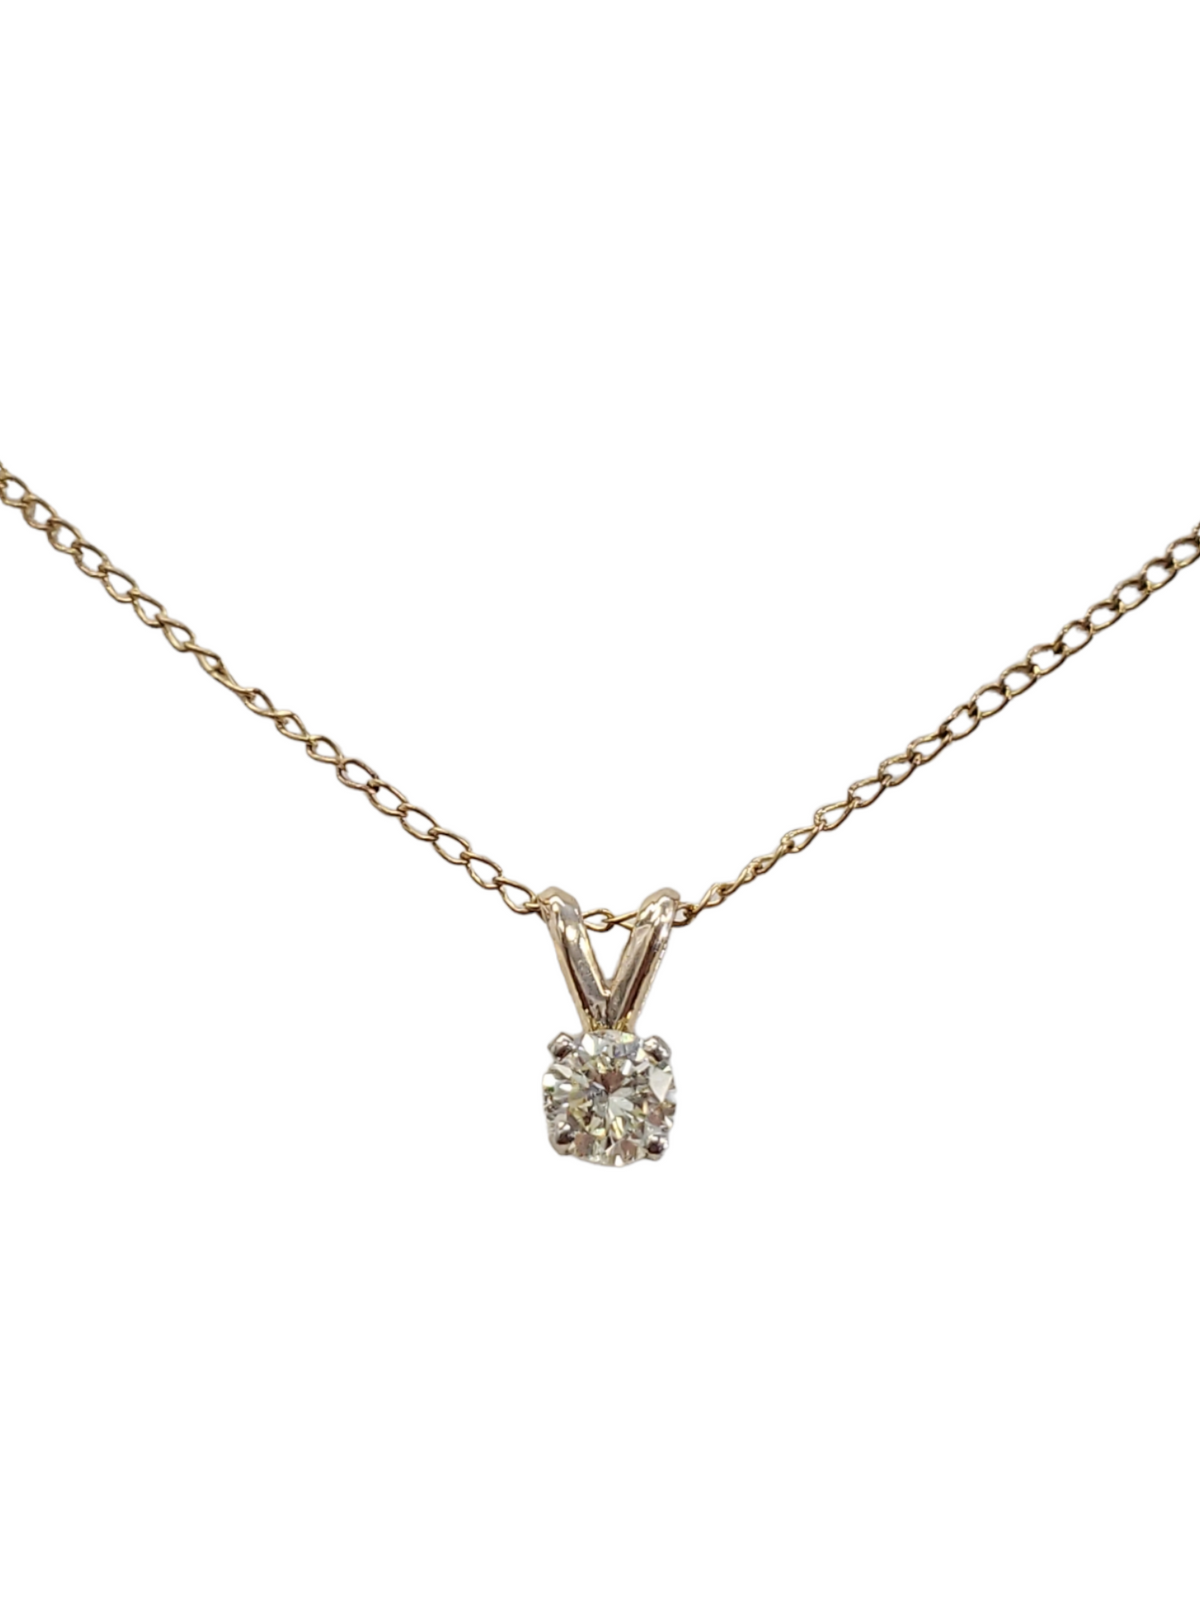 14K Yellow Gold Round Diamond Necklace with 14kt Yellow Gold Chain